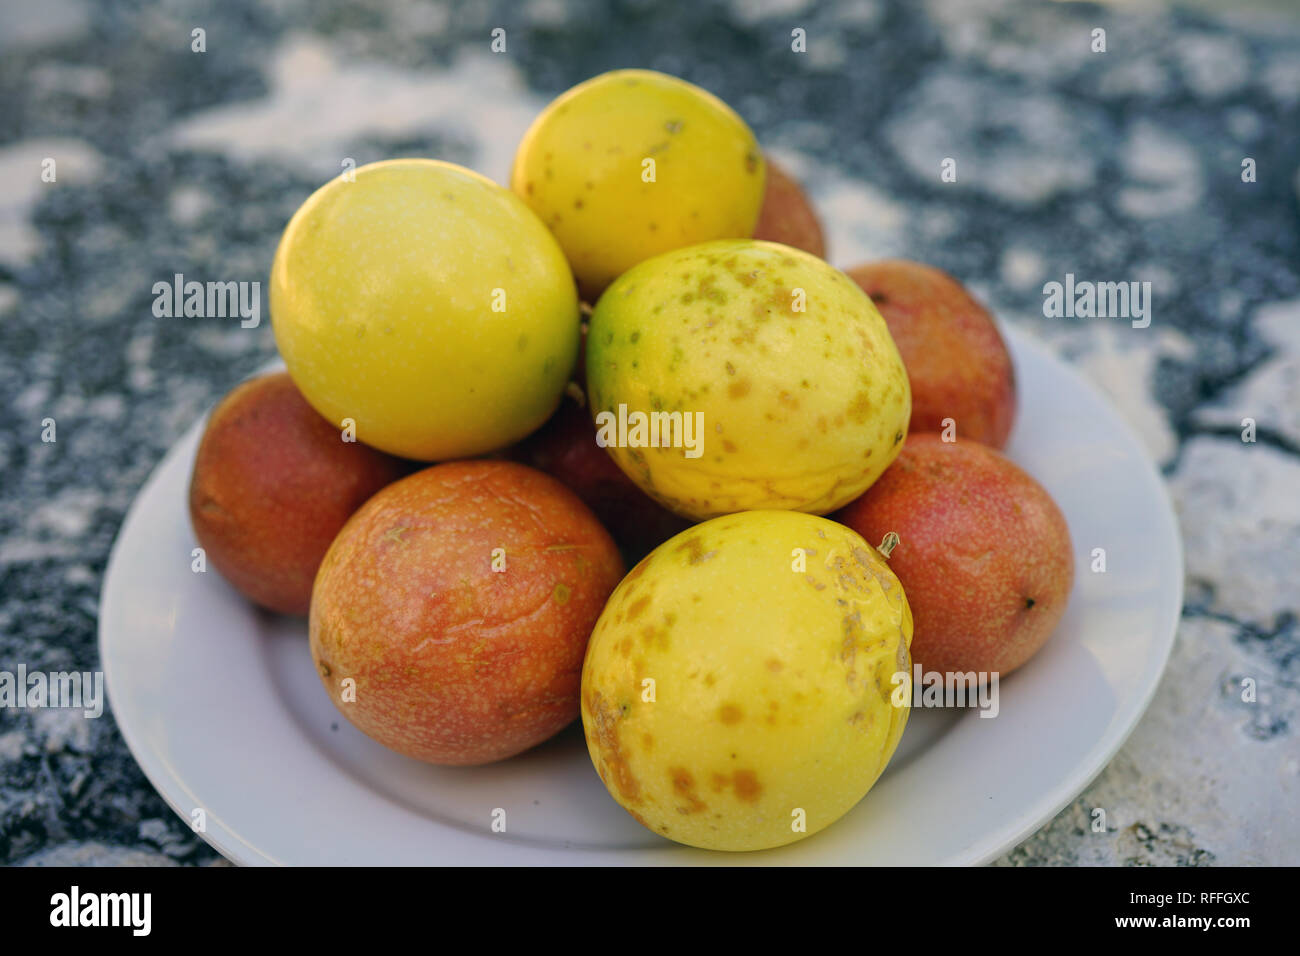 Platter of colorful ripe tropical passion fruit Stock Photo